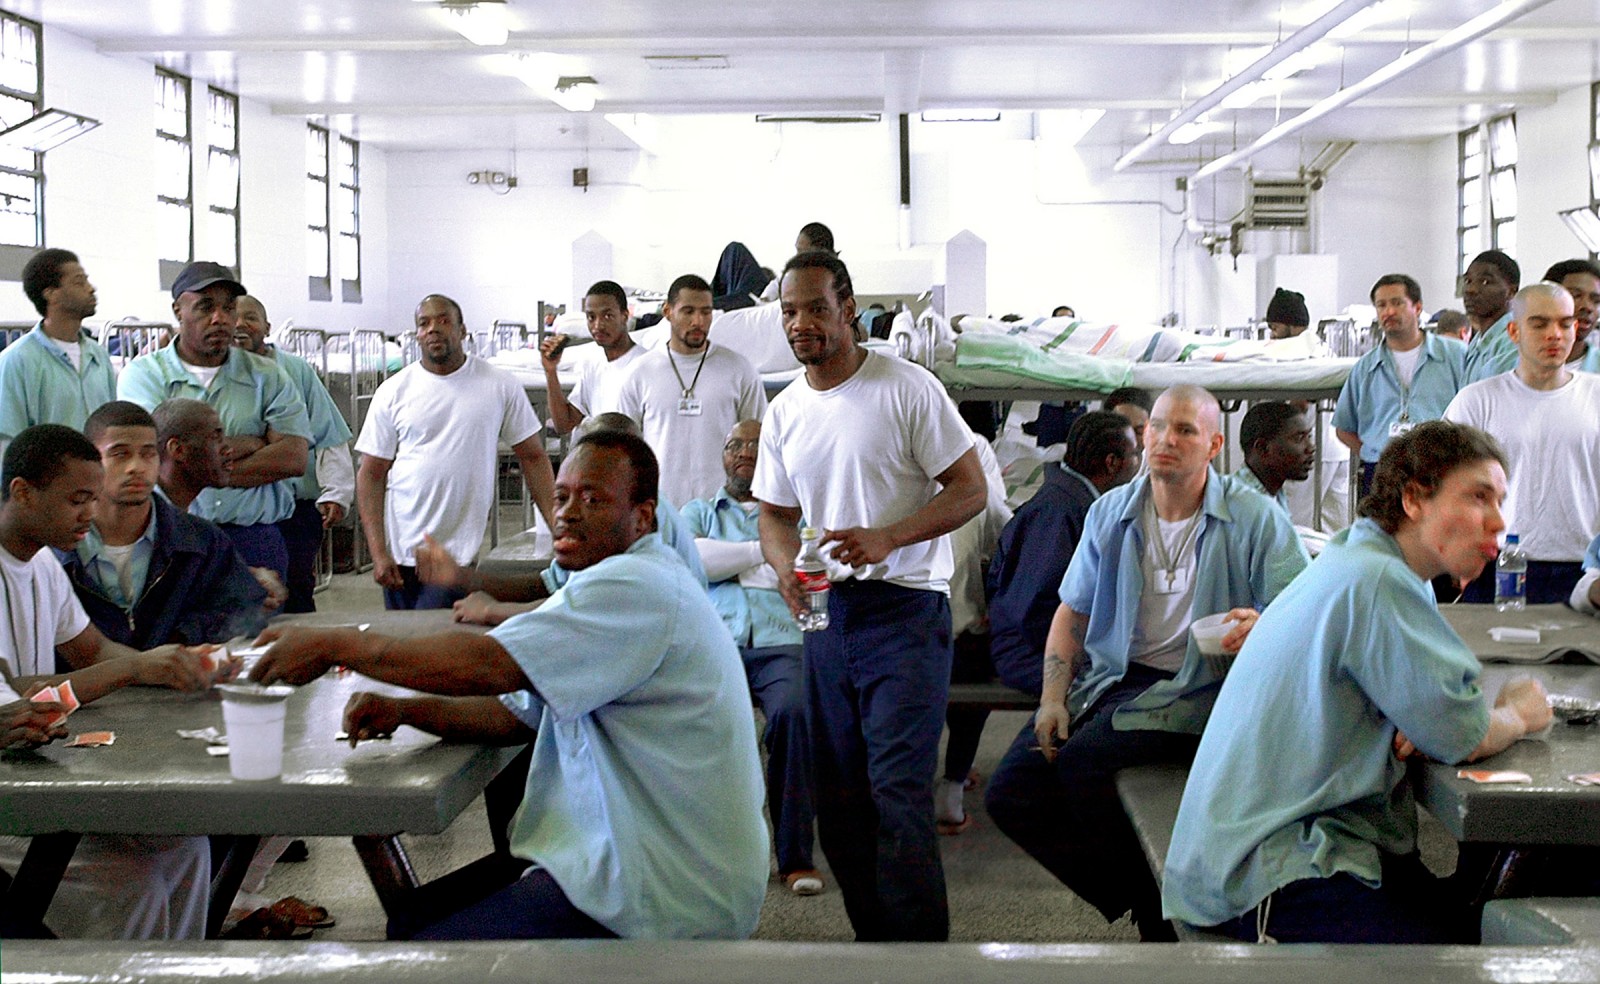 Early release for Illinois prisoners? Not so fast WBEZ Chicago